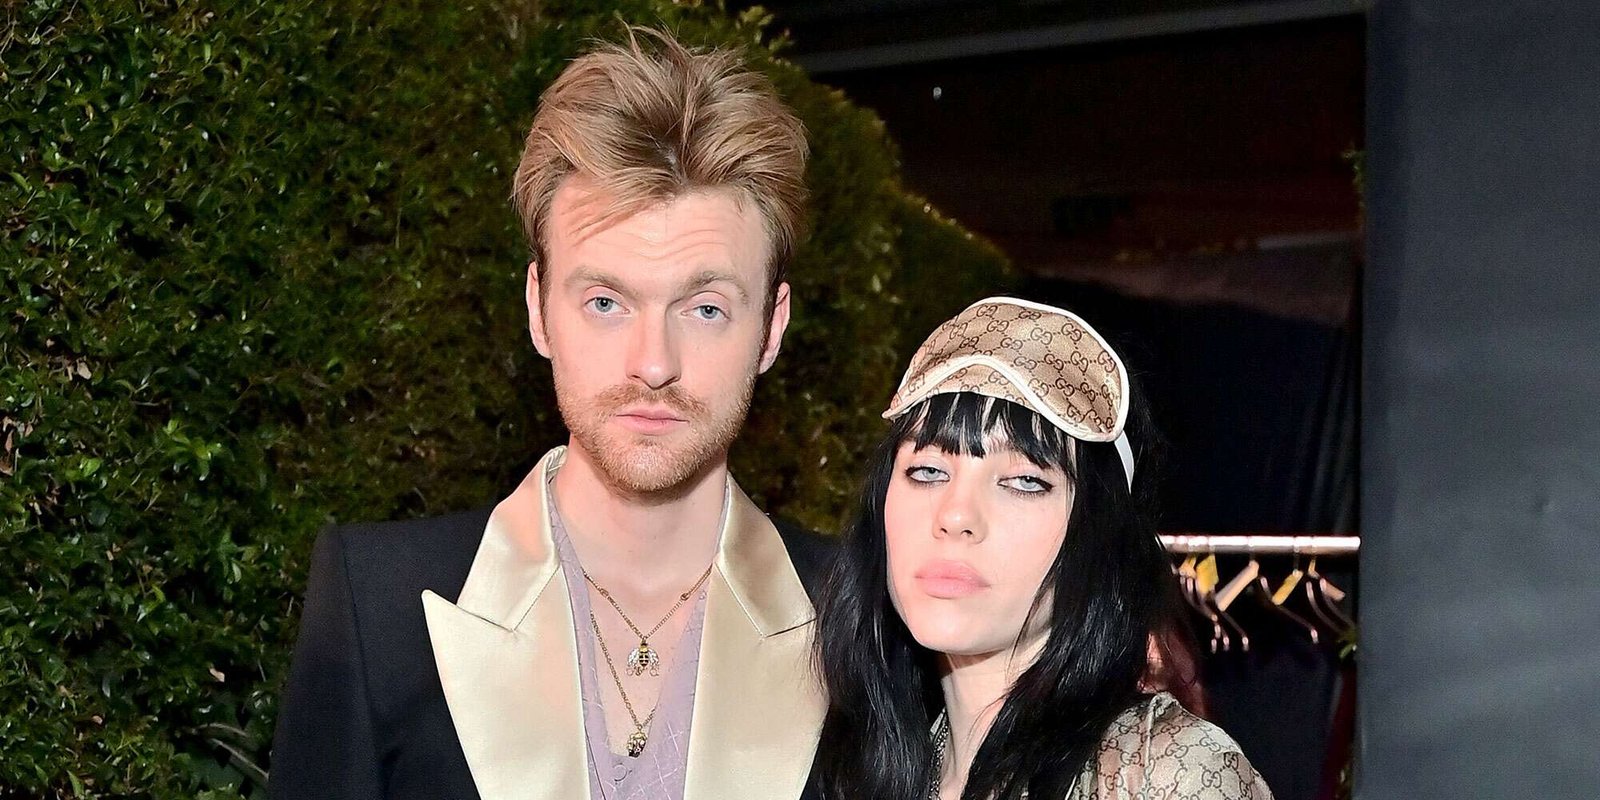 Billie Eilish and Finneas O’Connell’s household dwelling reportedly burglarized in L.A.